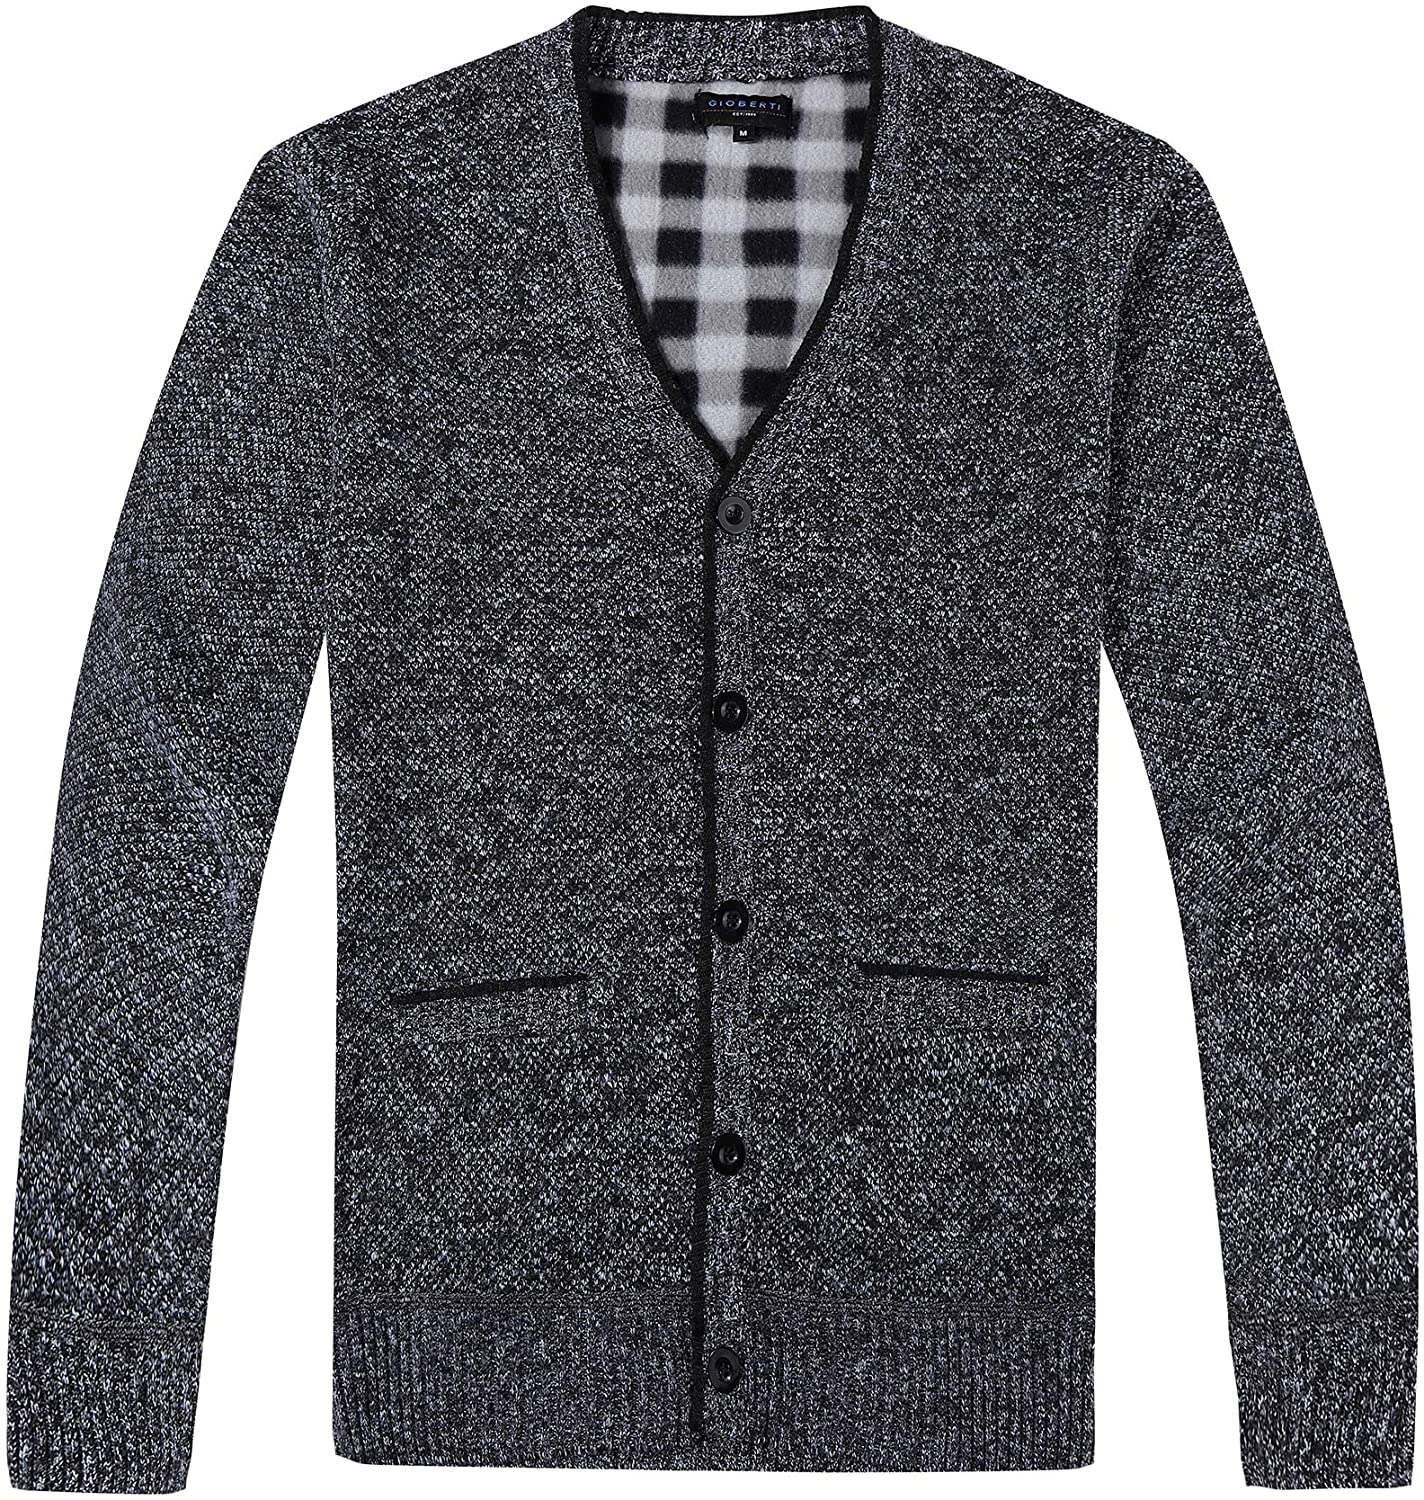 Gioberti Men's Knitted V-Neck Button Down Cardigan Sweater with Flannel ...